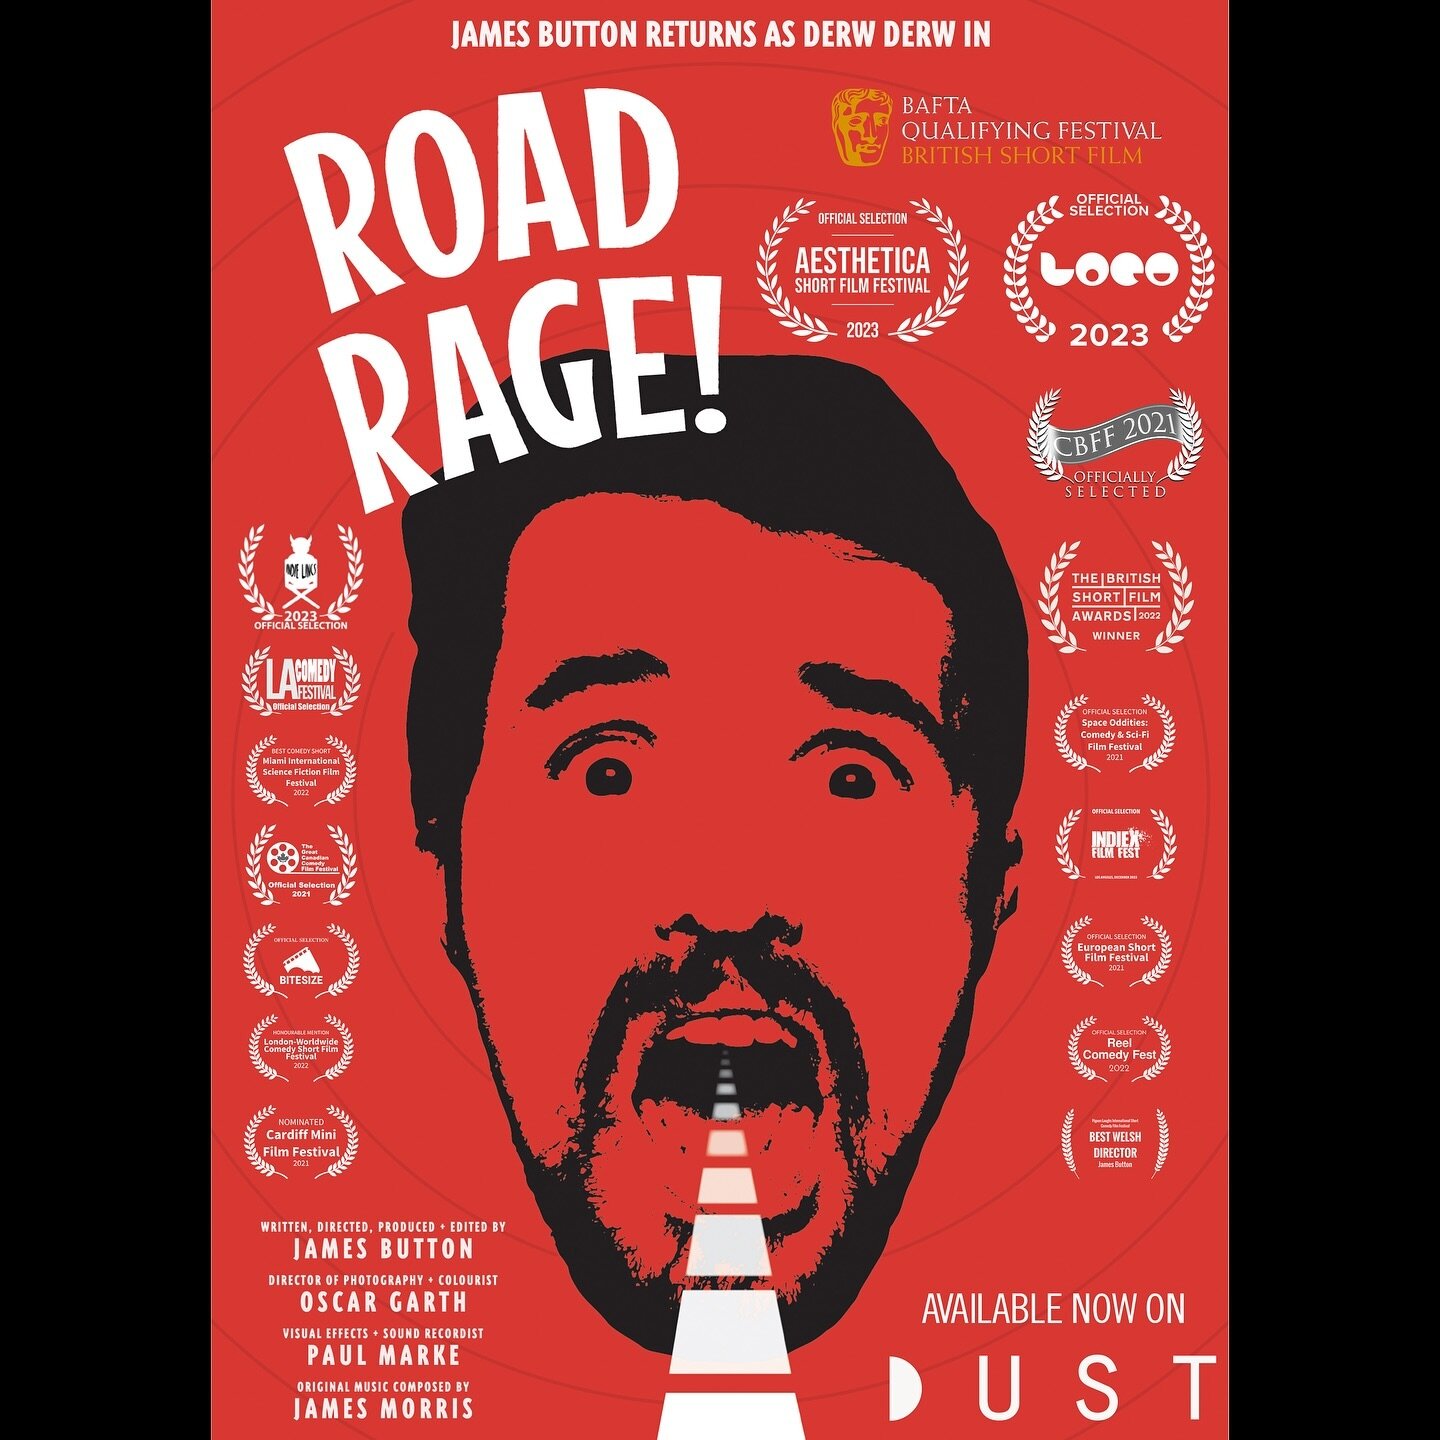 ROAD RAGE! has finally finished its mad roadtrip across film festivals both home and away! When the 3 of us (all cast and production crew) were up a mountain in Wales just a few days before lockdown filming this nonsense we didn&rsquo;t really expect